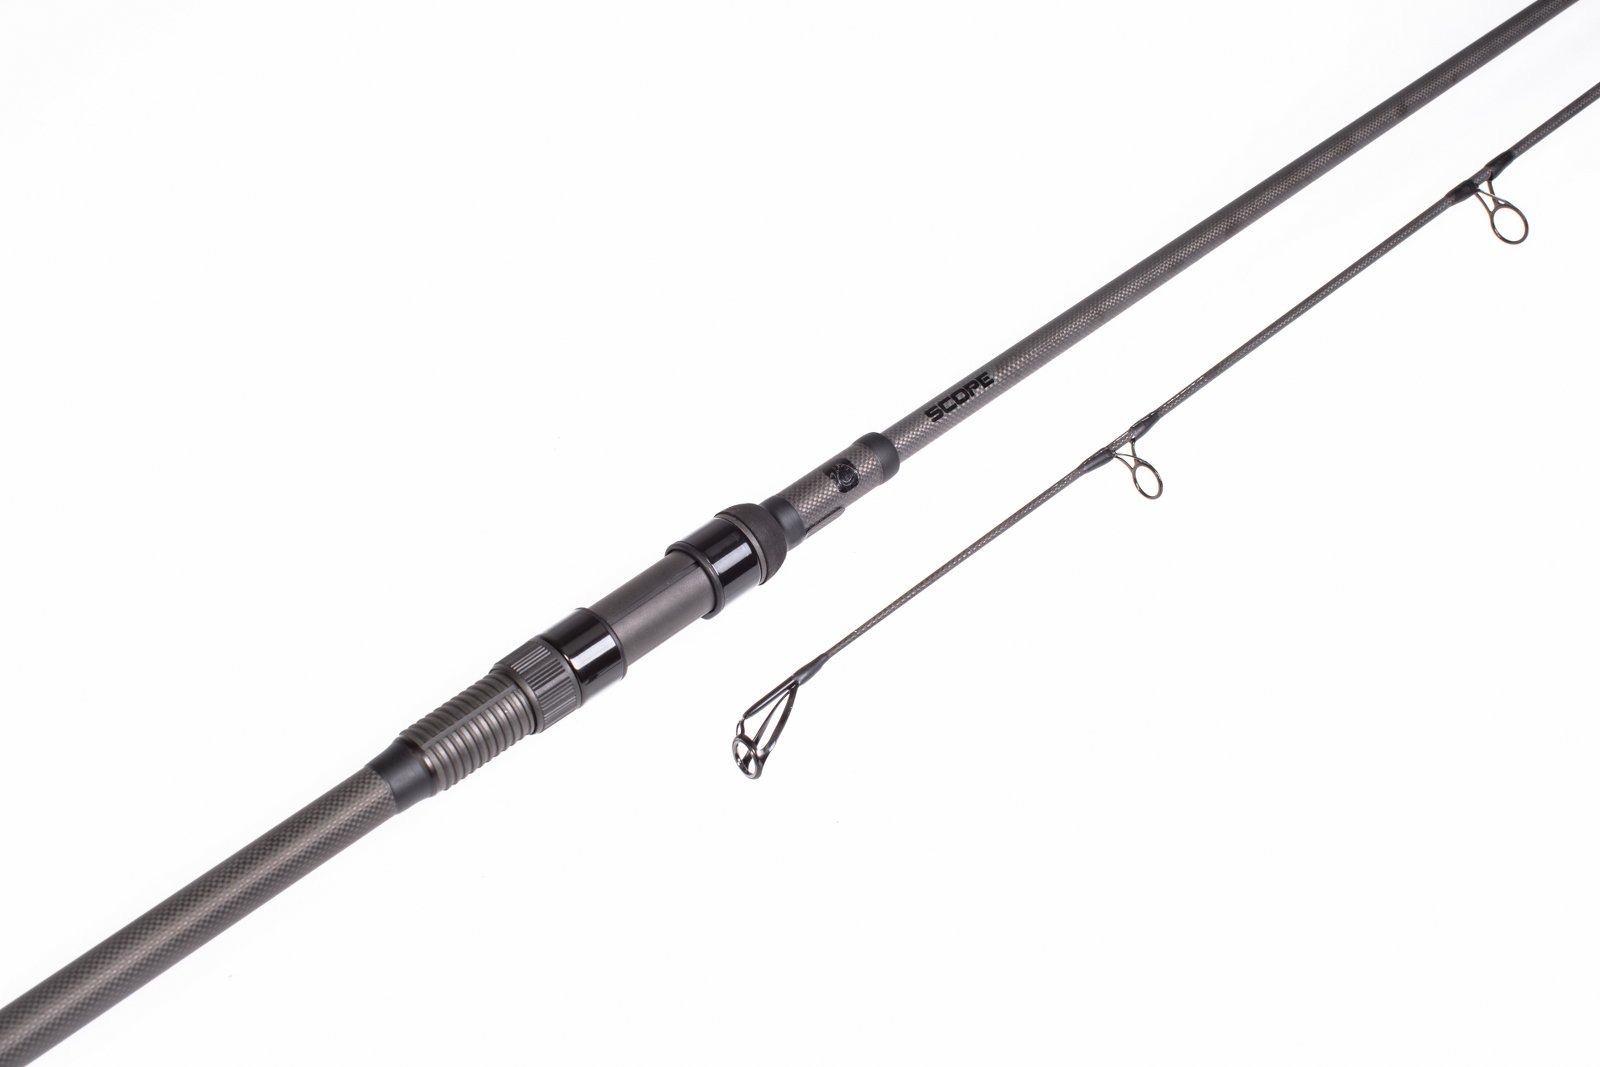 Nash Scope Abbreviated 9ft 3lb Scope Rods Tackle T1536 International Shop Europe